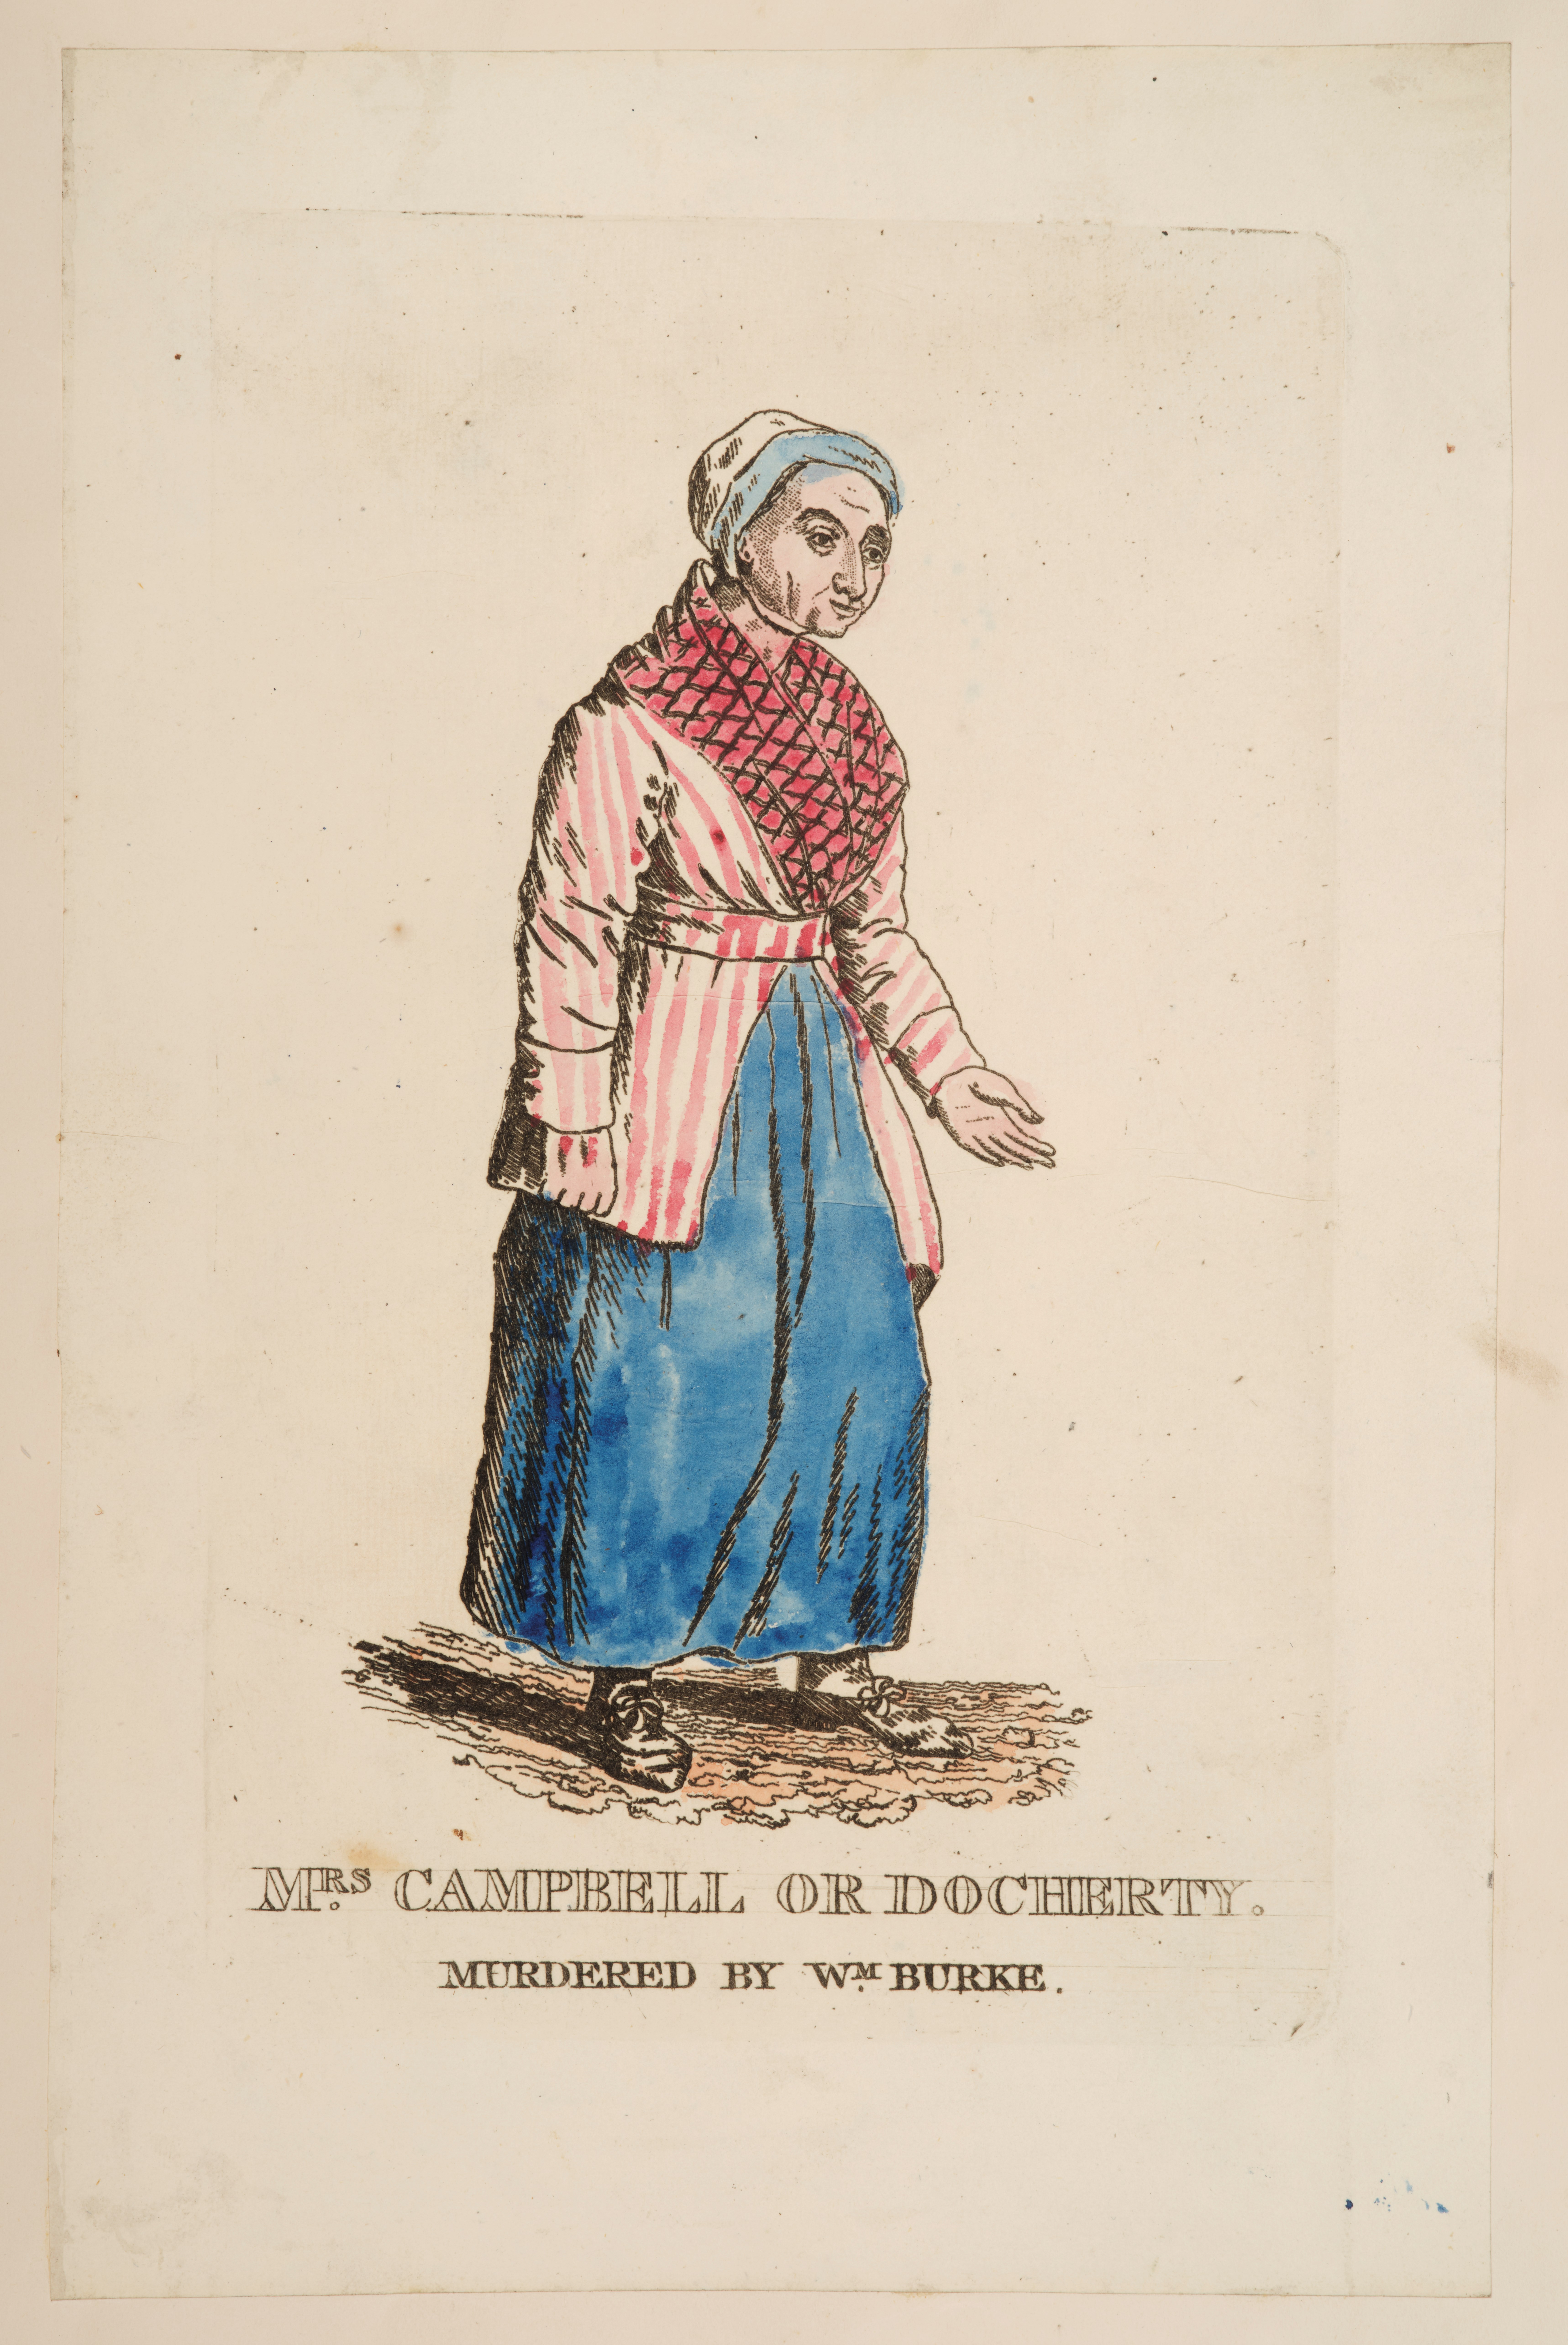 Colour illustration of a working woman in period dress from early 19th century